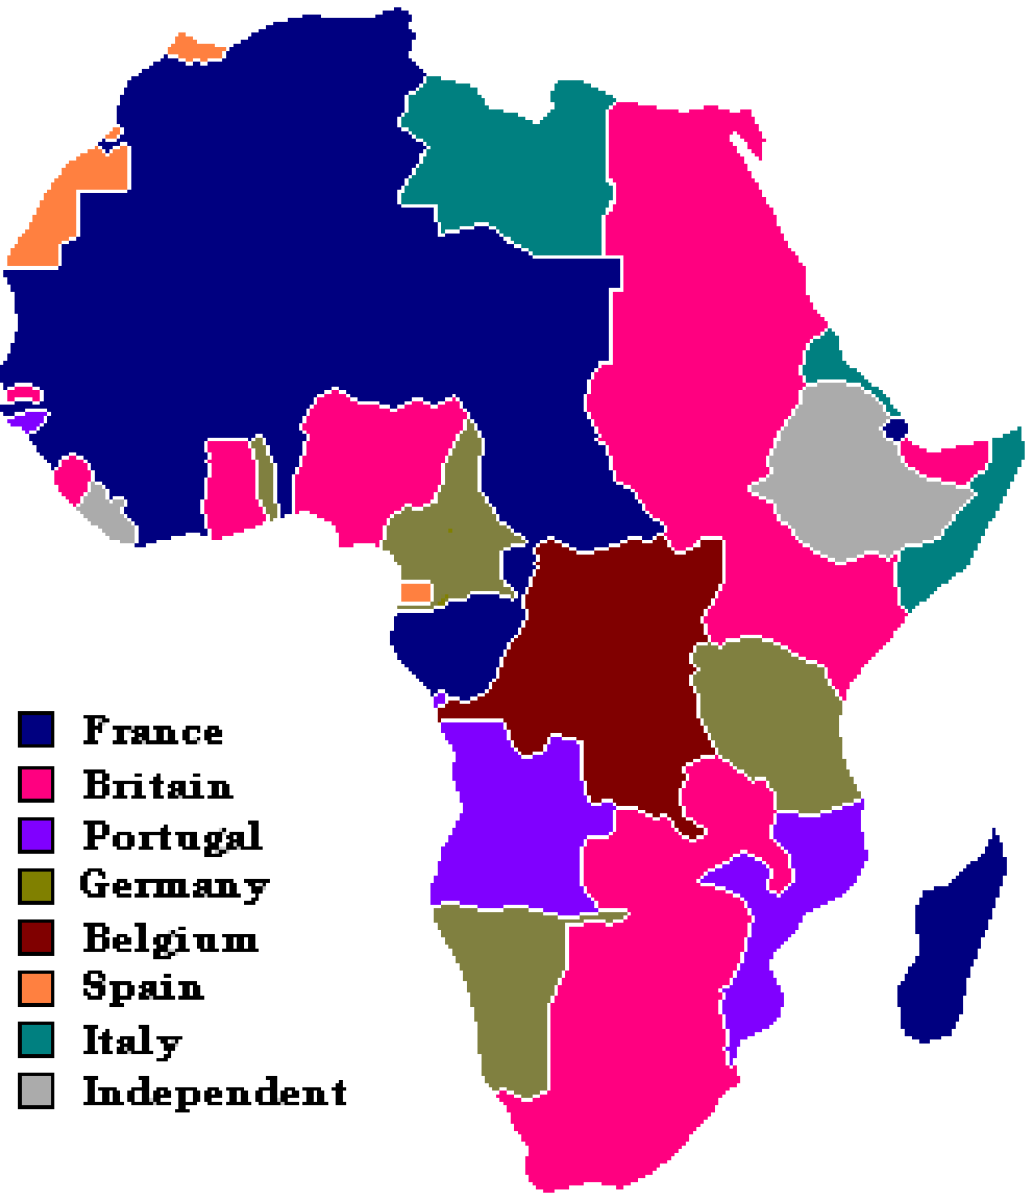 Africa divided into colonies